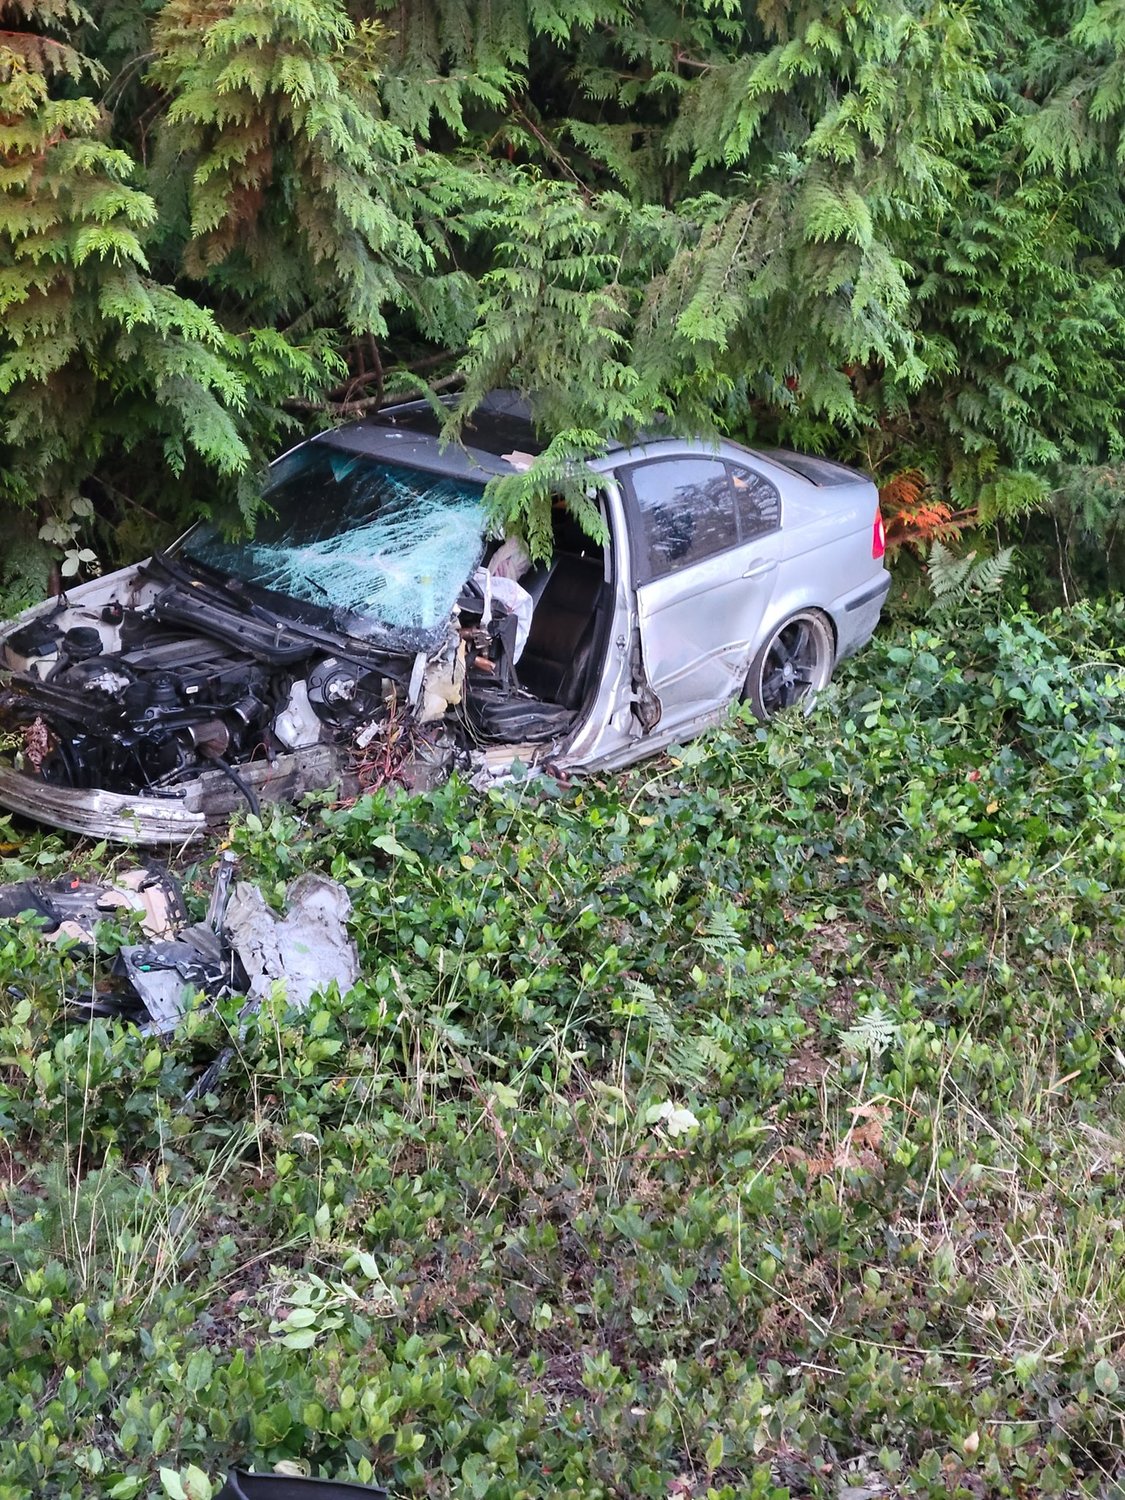 A man was airlifted to Harborview Medical Center in Seattle after he fell asleep at the wheel and crashed into a pickup truck on U.S. Highway 12 at mile marker 69 early Wednesday morning.